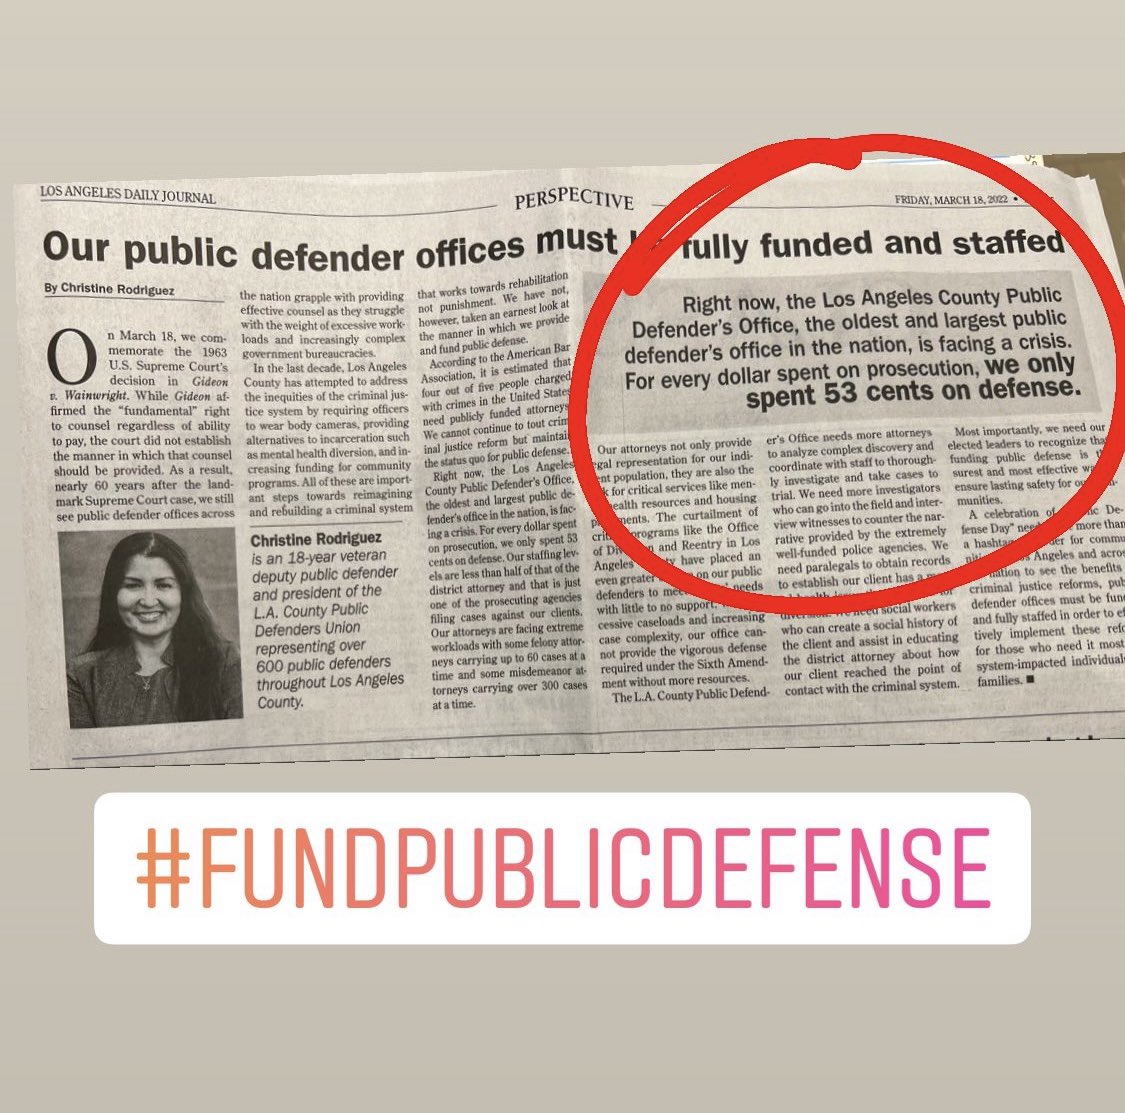 Proud of @LApubdefunion for always fighting for our system-impacted communities! #fundpublicdefense #PublicDefenseDay ⚖️